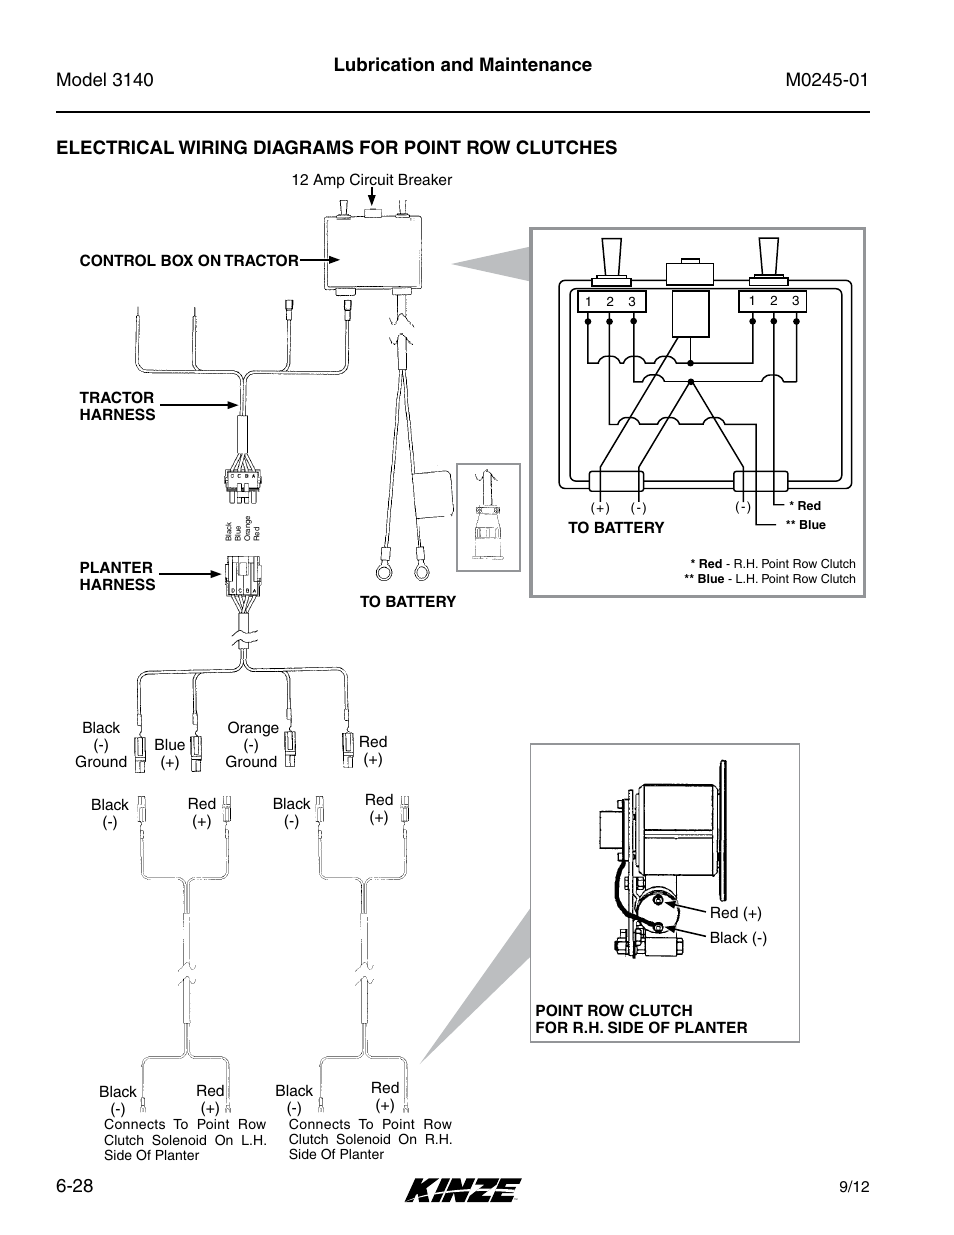 Electrical wiring diagrams for point row clutches, Lubrication and maintenance | Kinze 3140 Stack Fold Planter Rev. 7/14 User Manual | Page 134 / 150